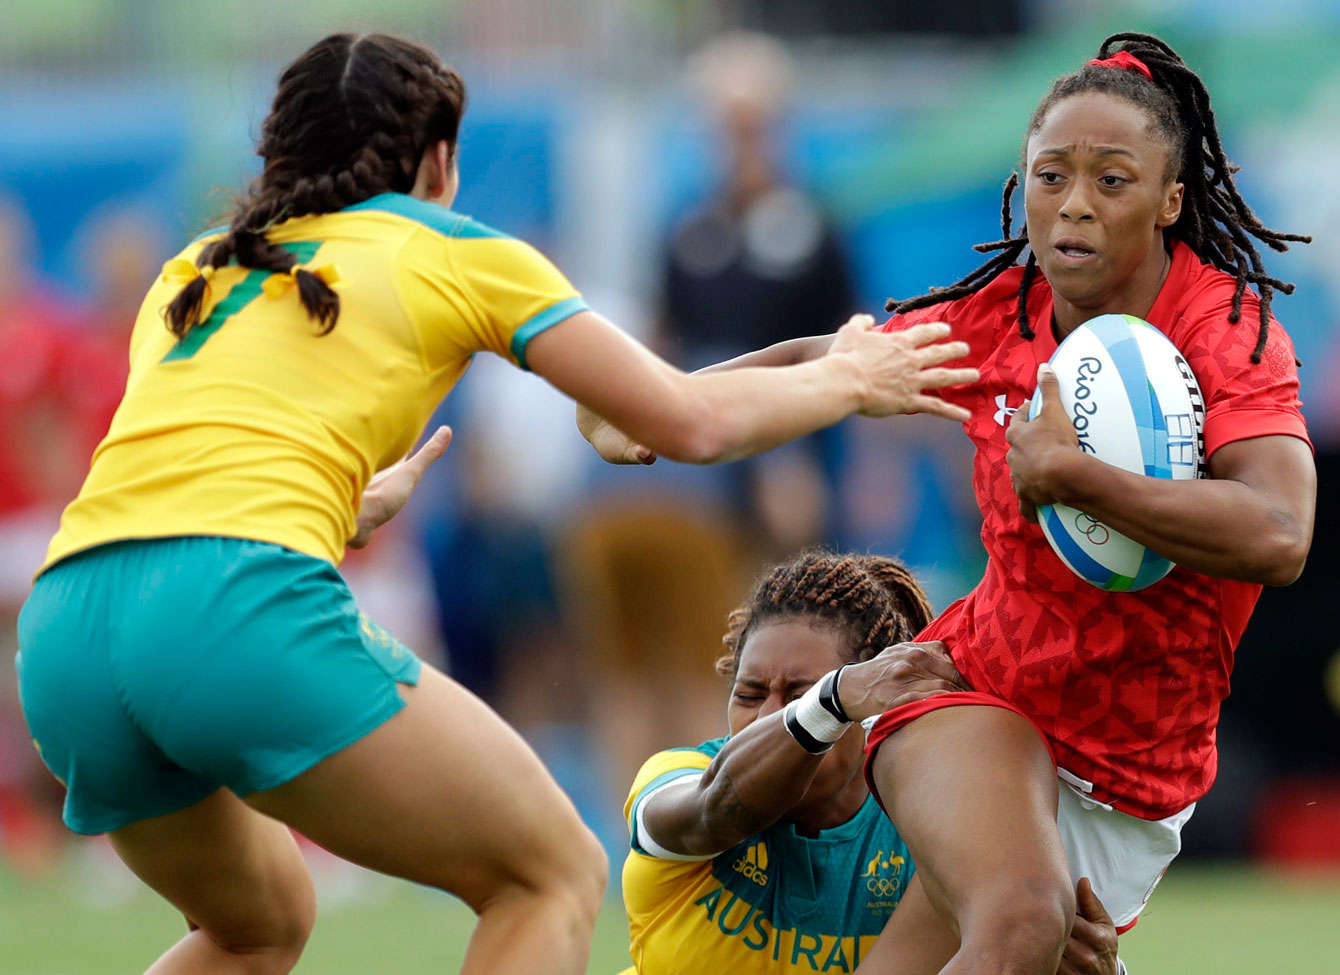 Charity Williams scores her first Olympic try against Australia on August 8 at Rio 2016. (AP Photo/Themba Hadebe)